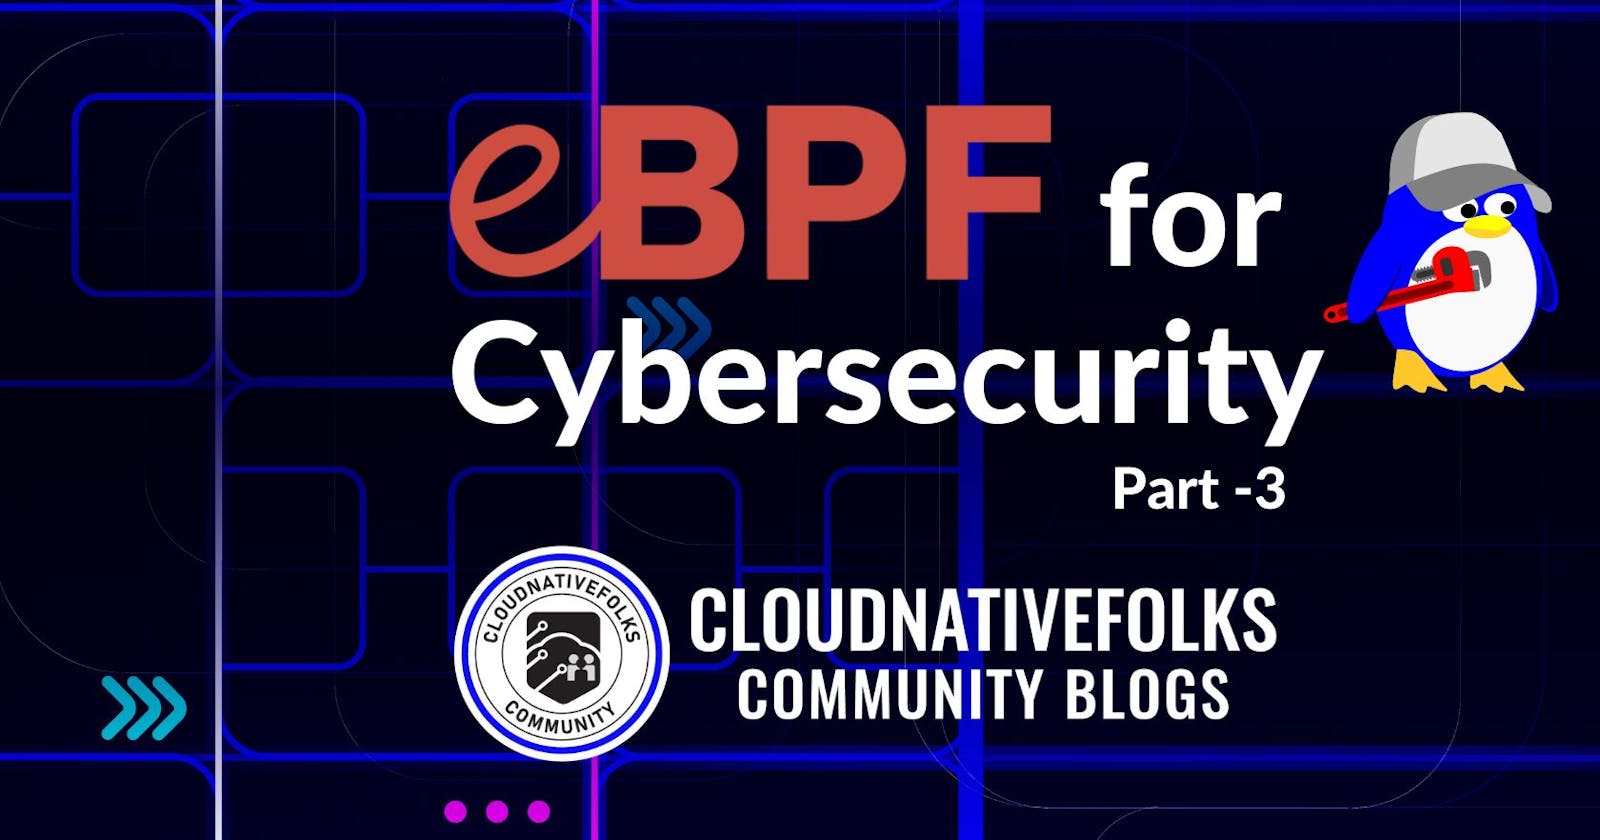 eBPF for Cybersecurity - Part 3